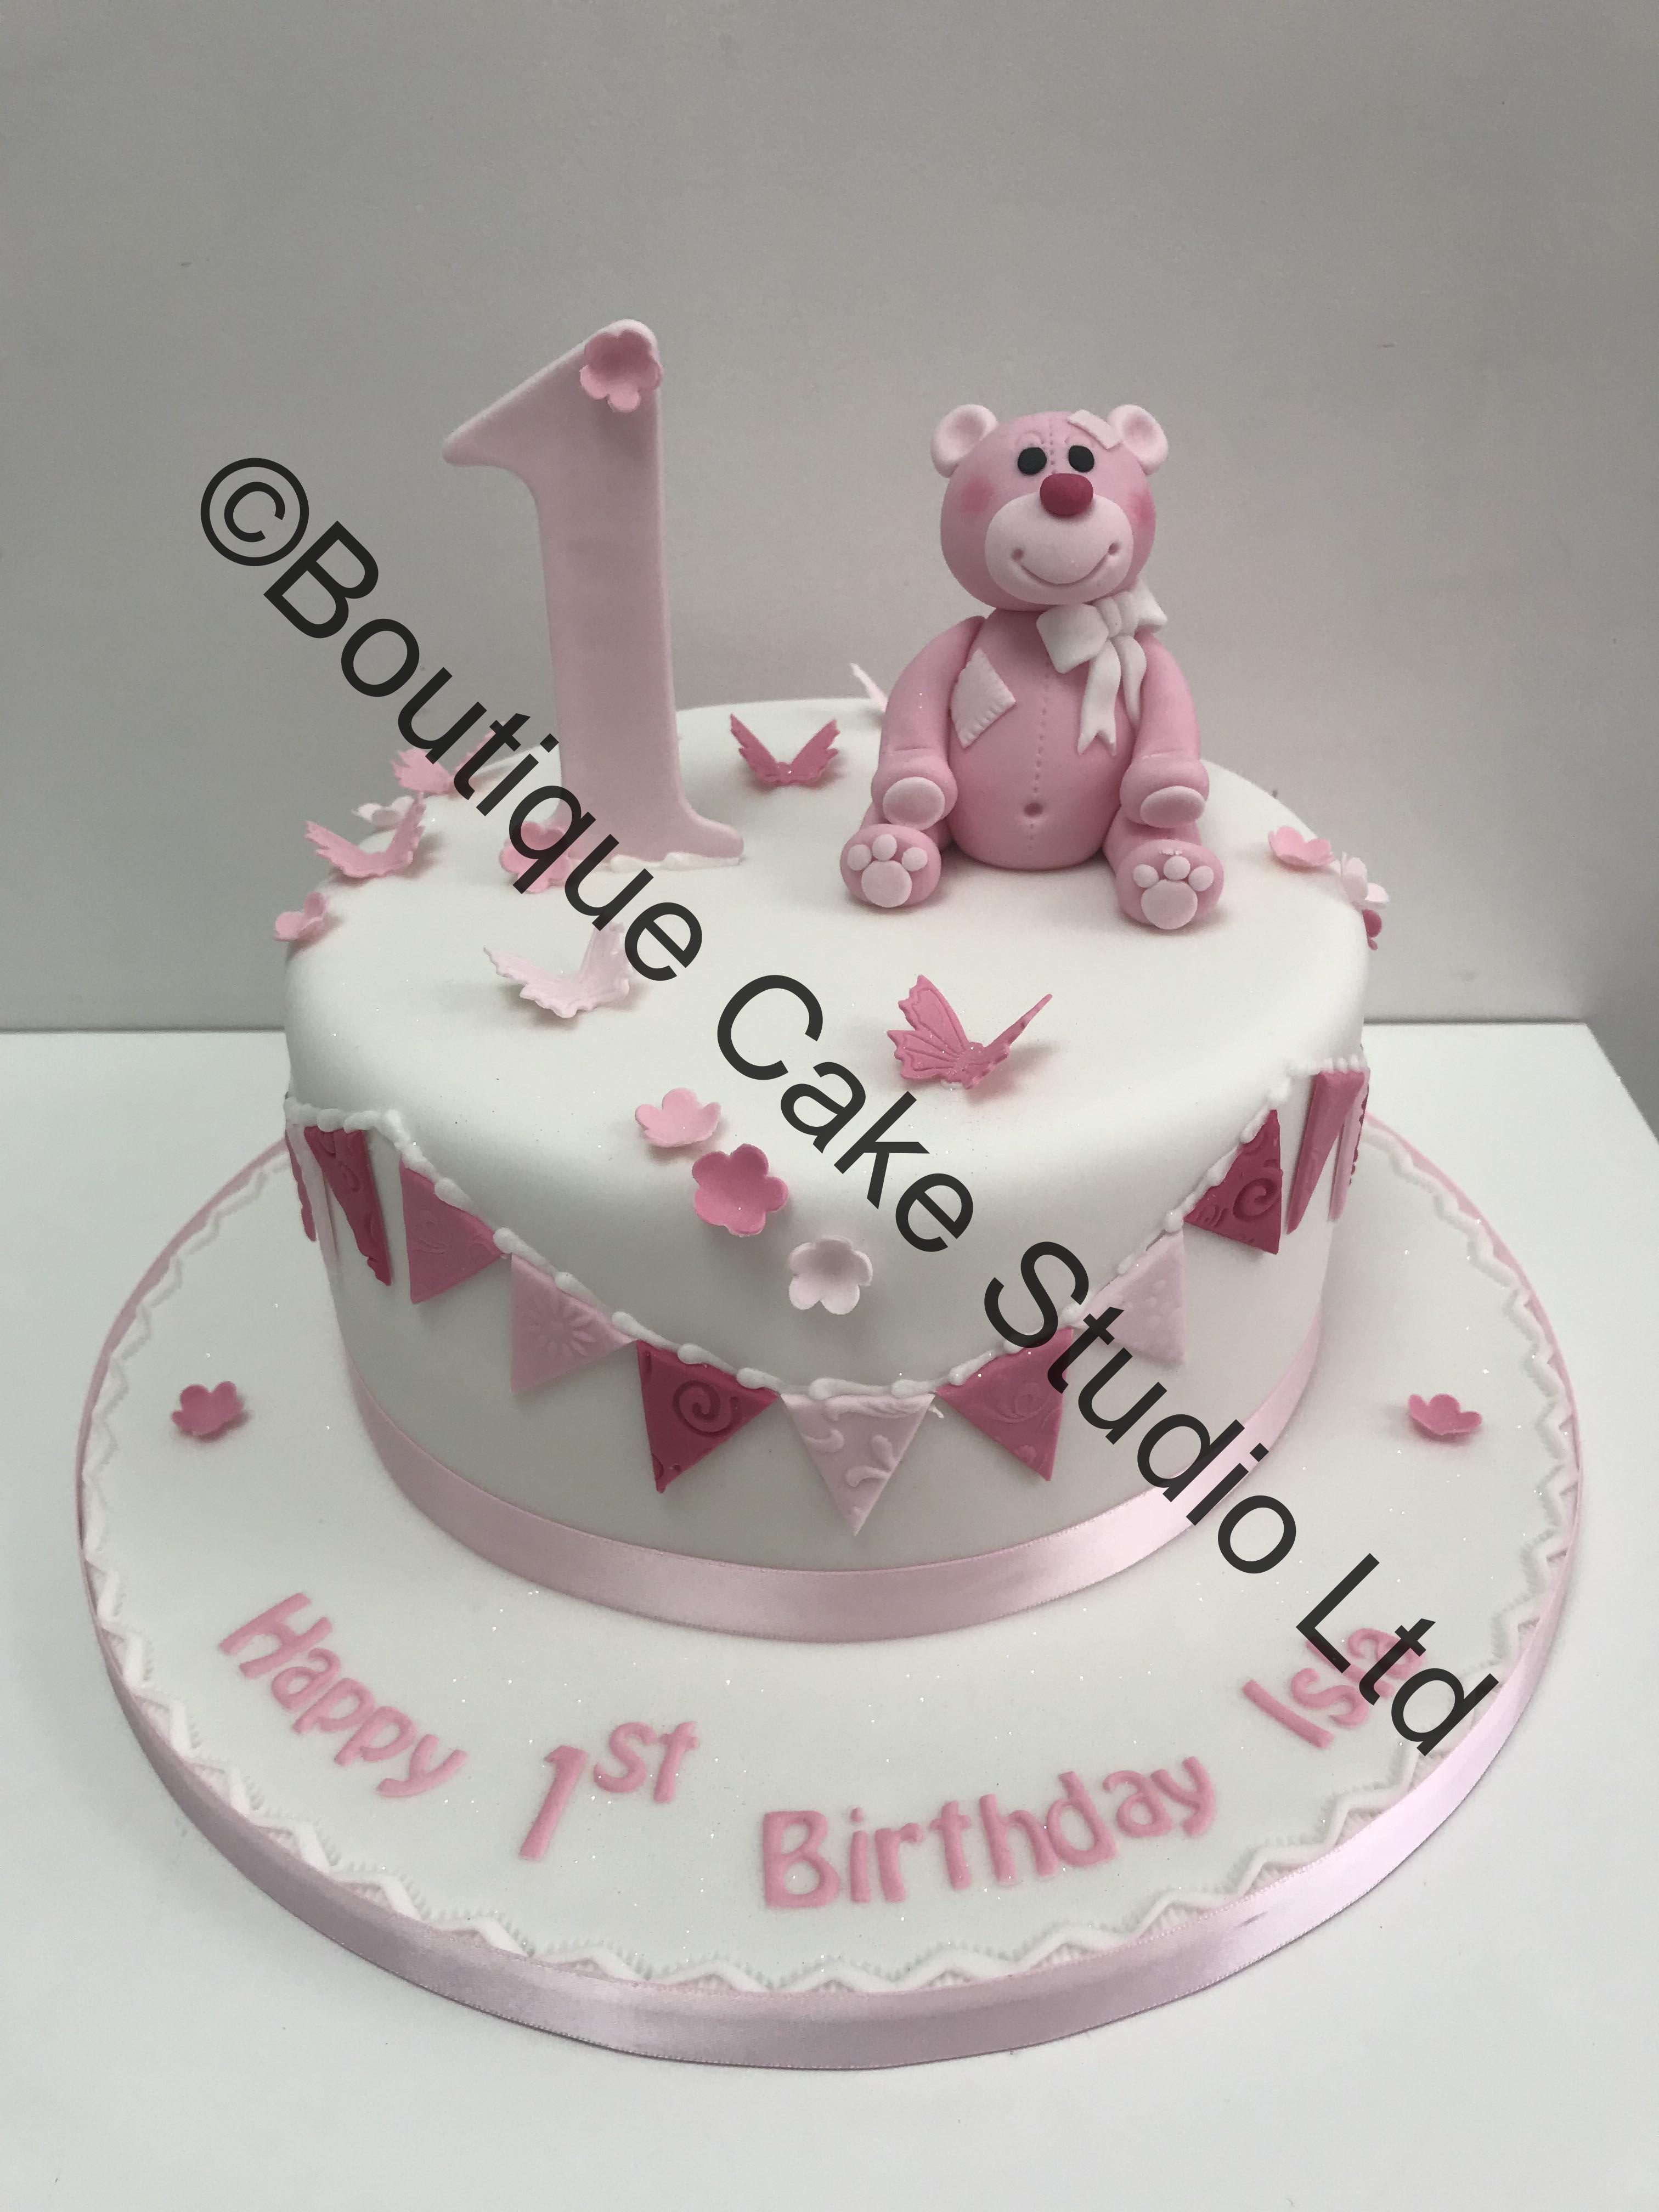 Baby Pink Cake with Teddy and Buntin